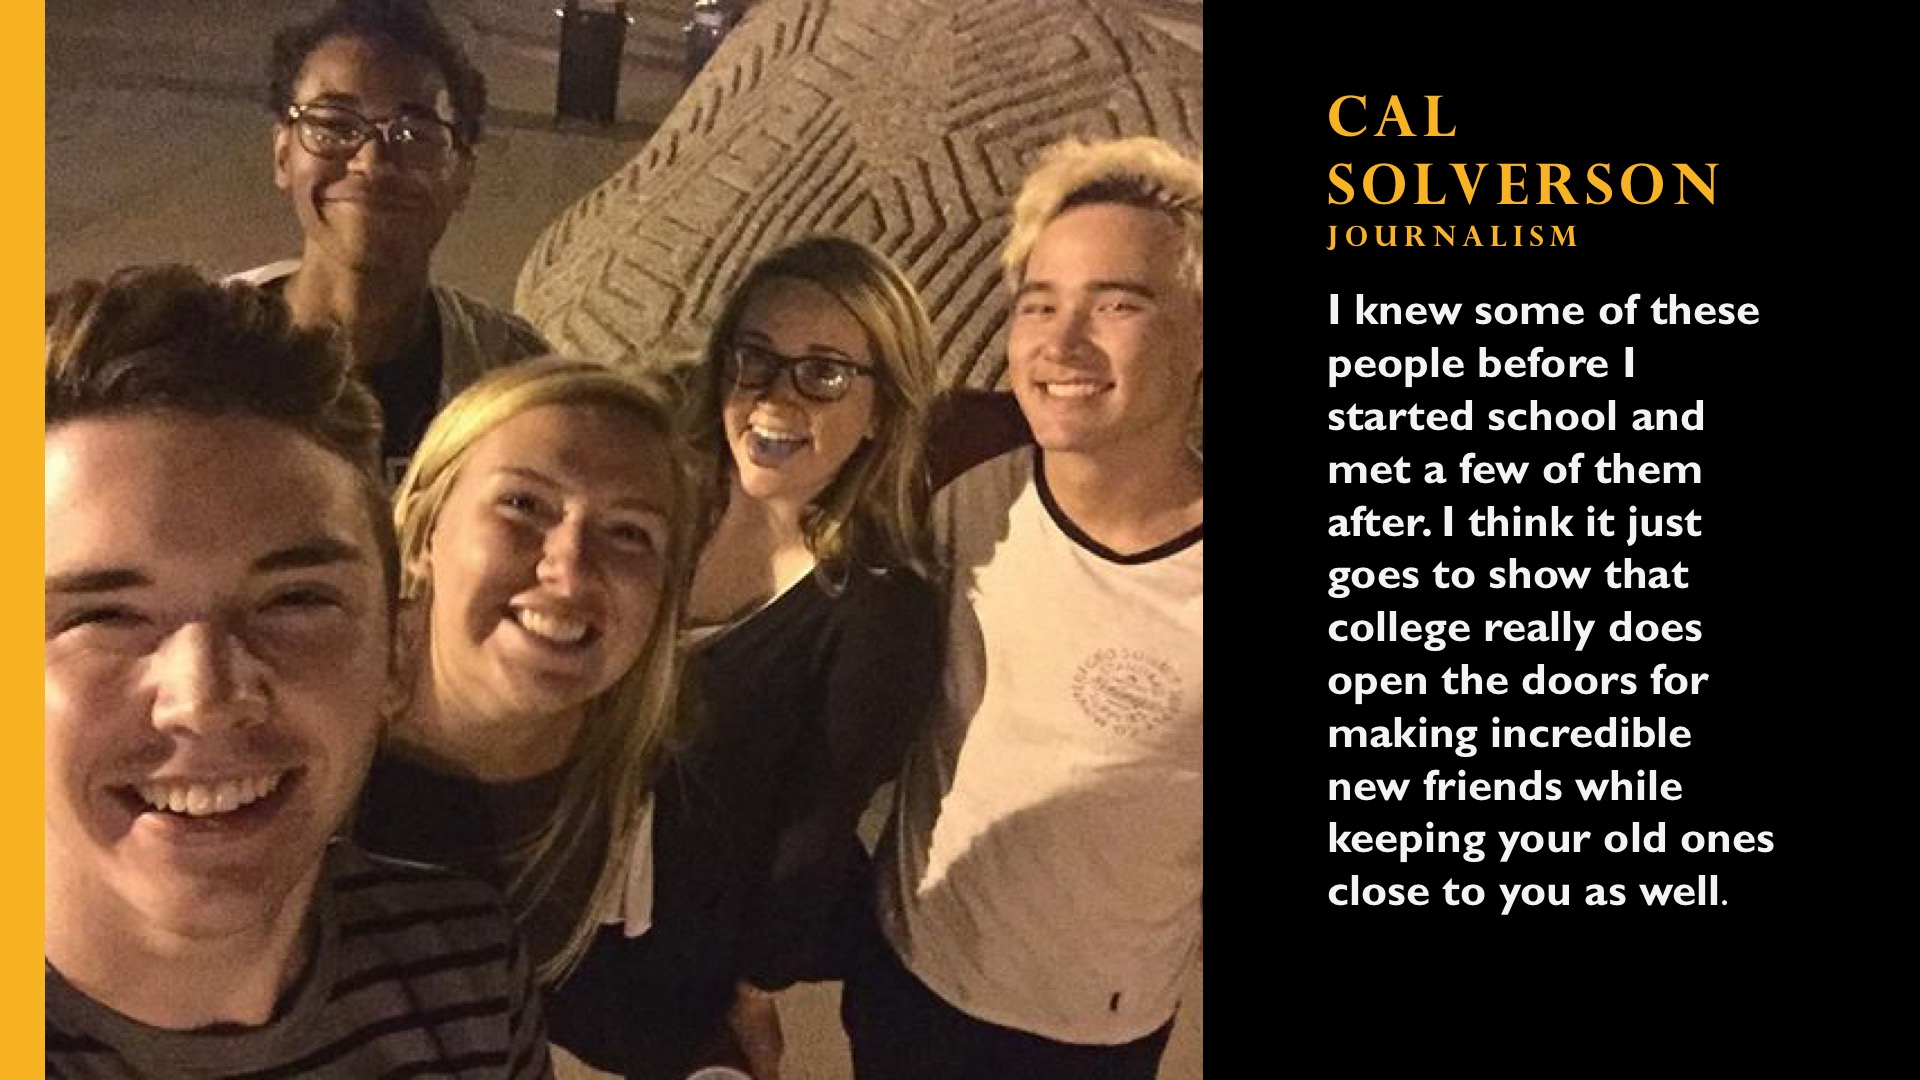 Cal Solverson. Journalism. I knew some of these people before I started school and met a few of them after. I think it just goes to show that college really does open the doors for making incredible new friends while keeping your old ones as well. 